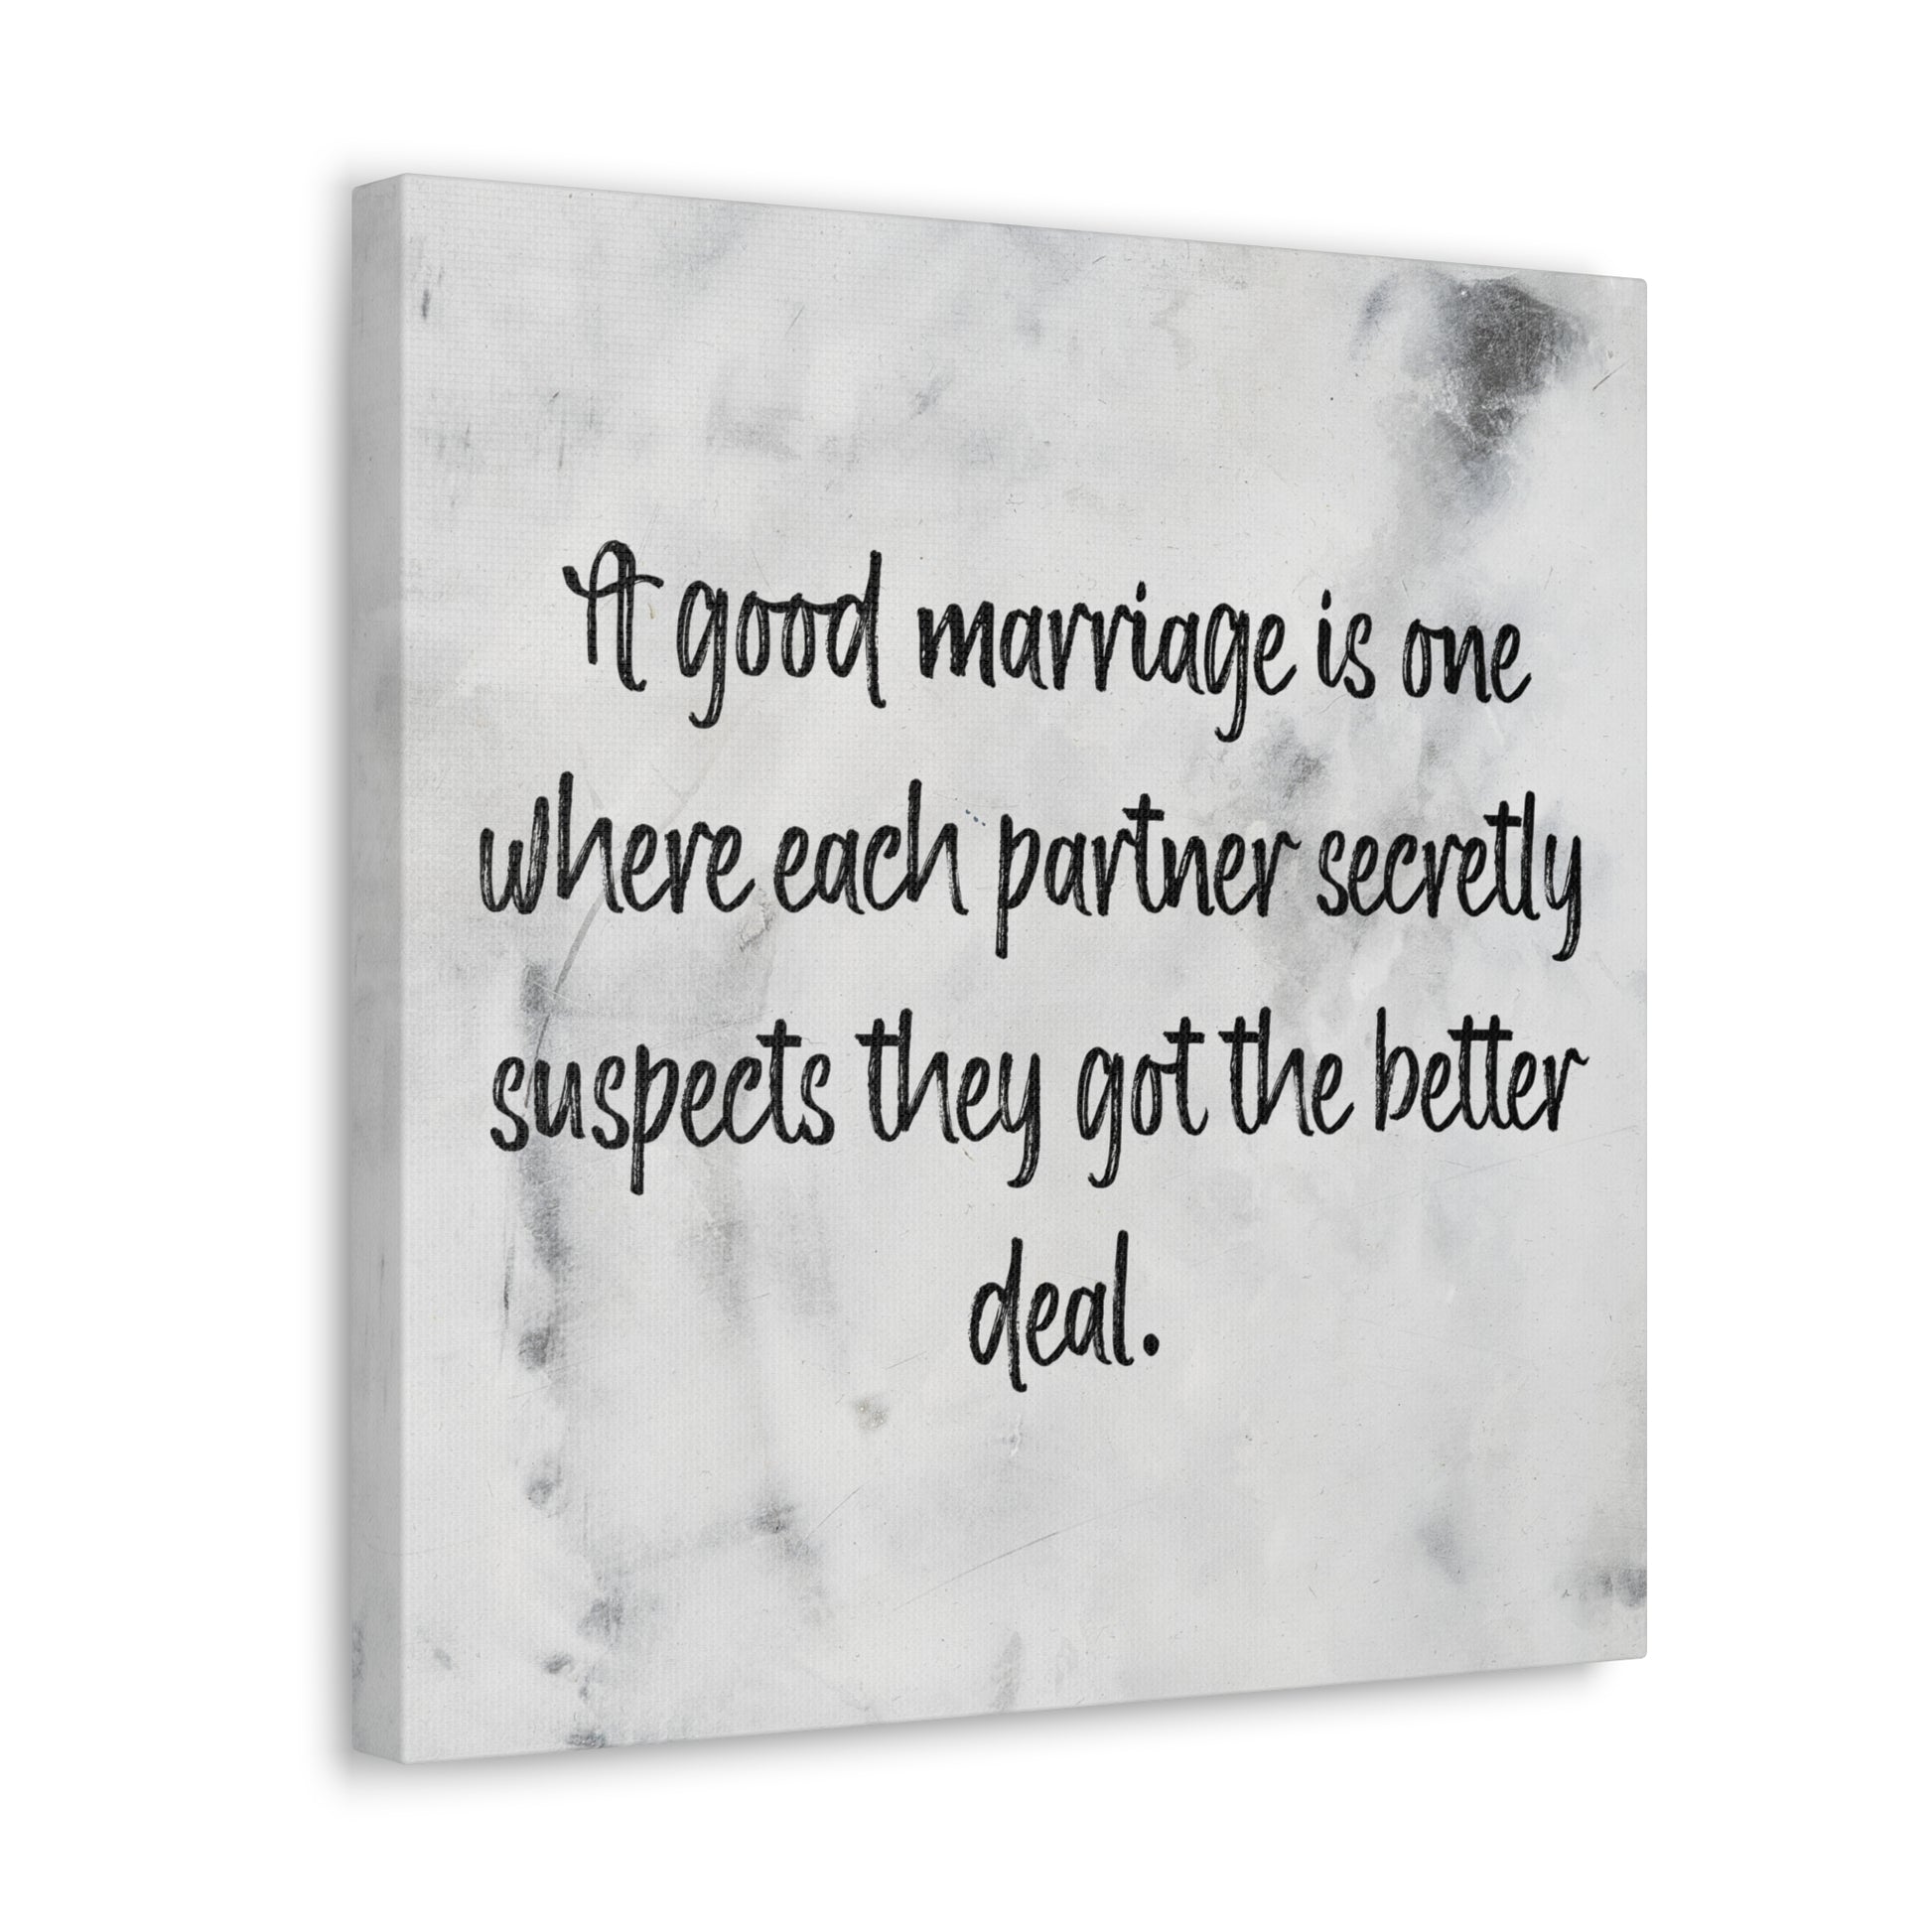 Eye-catching wall art with marriage wisdom and humor.